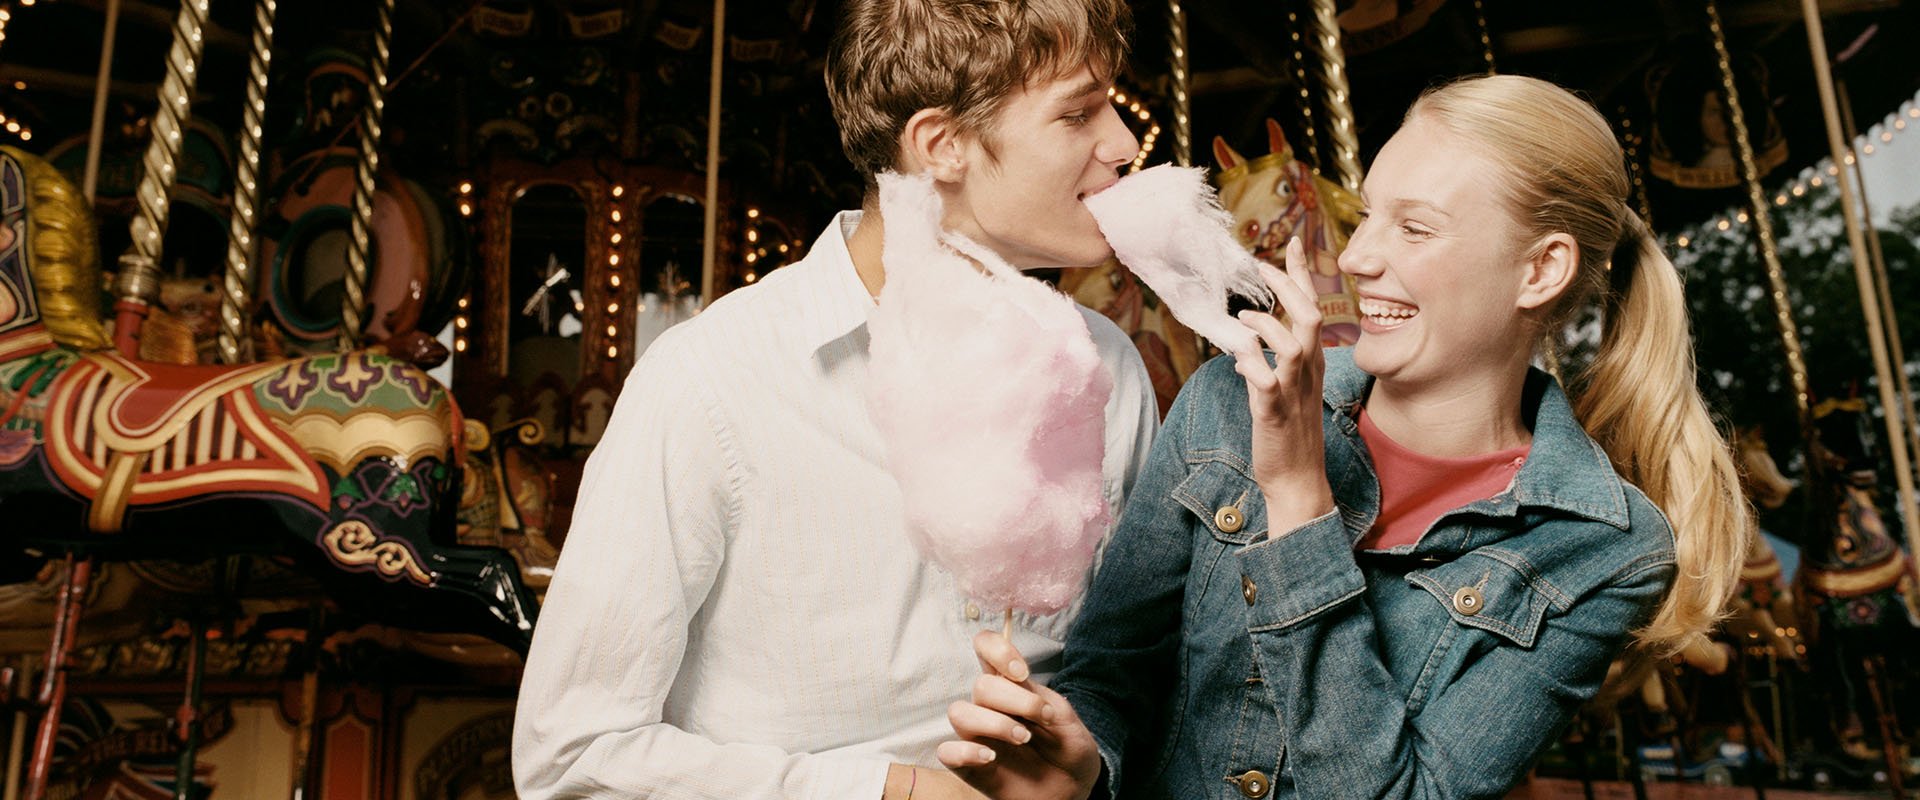 Man and woman eating cotton candy together and laughing as example how to flirt